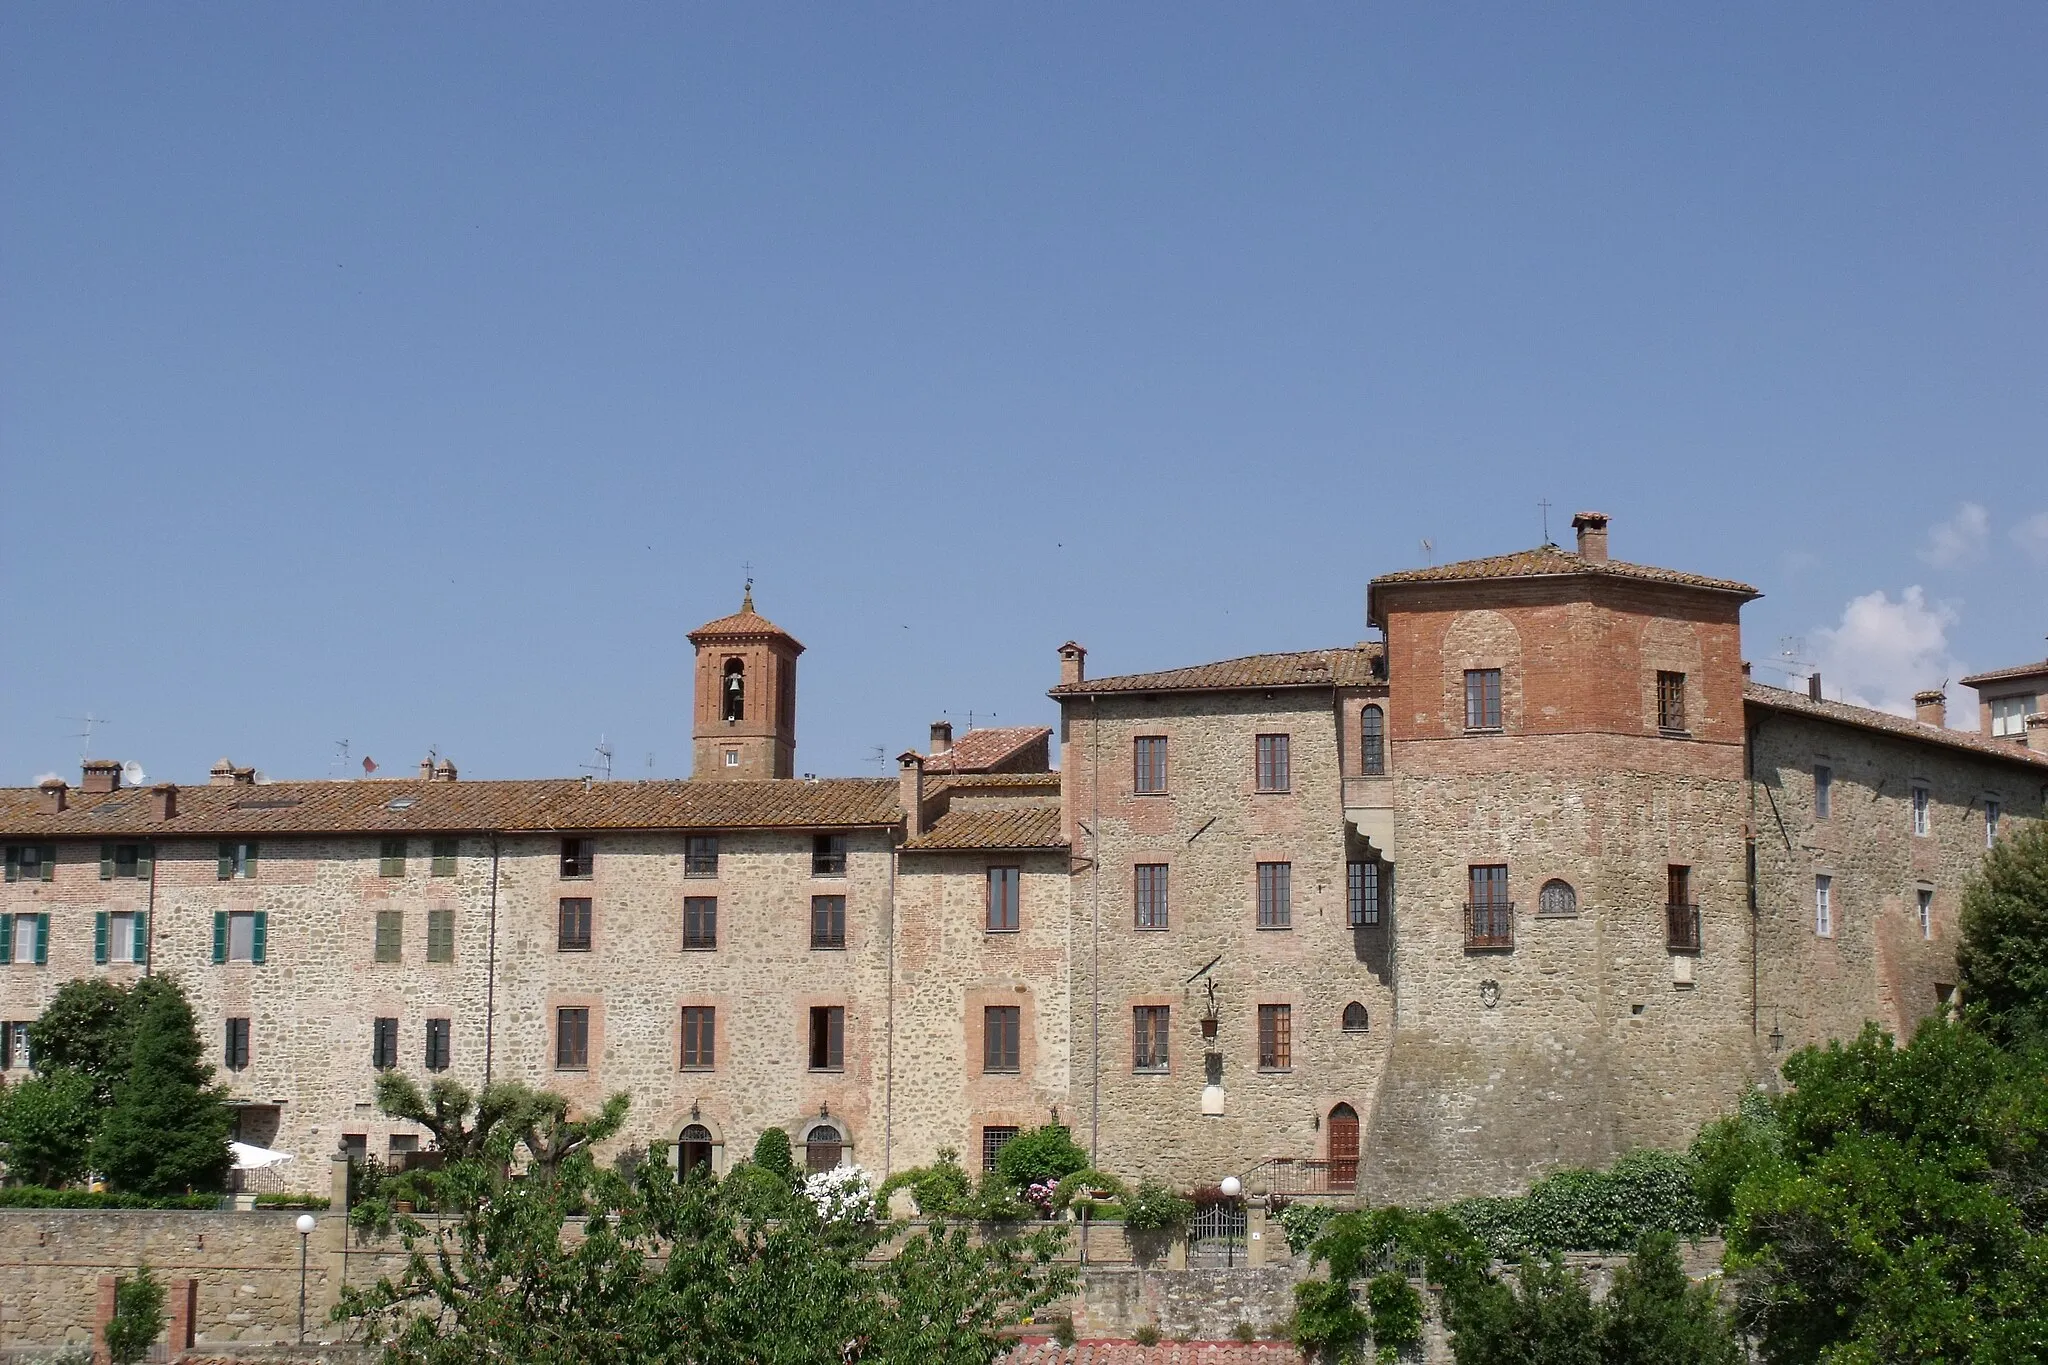 Photo showing: City of Paciano, Province of Perugia, Umbria, Italy